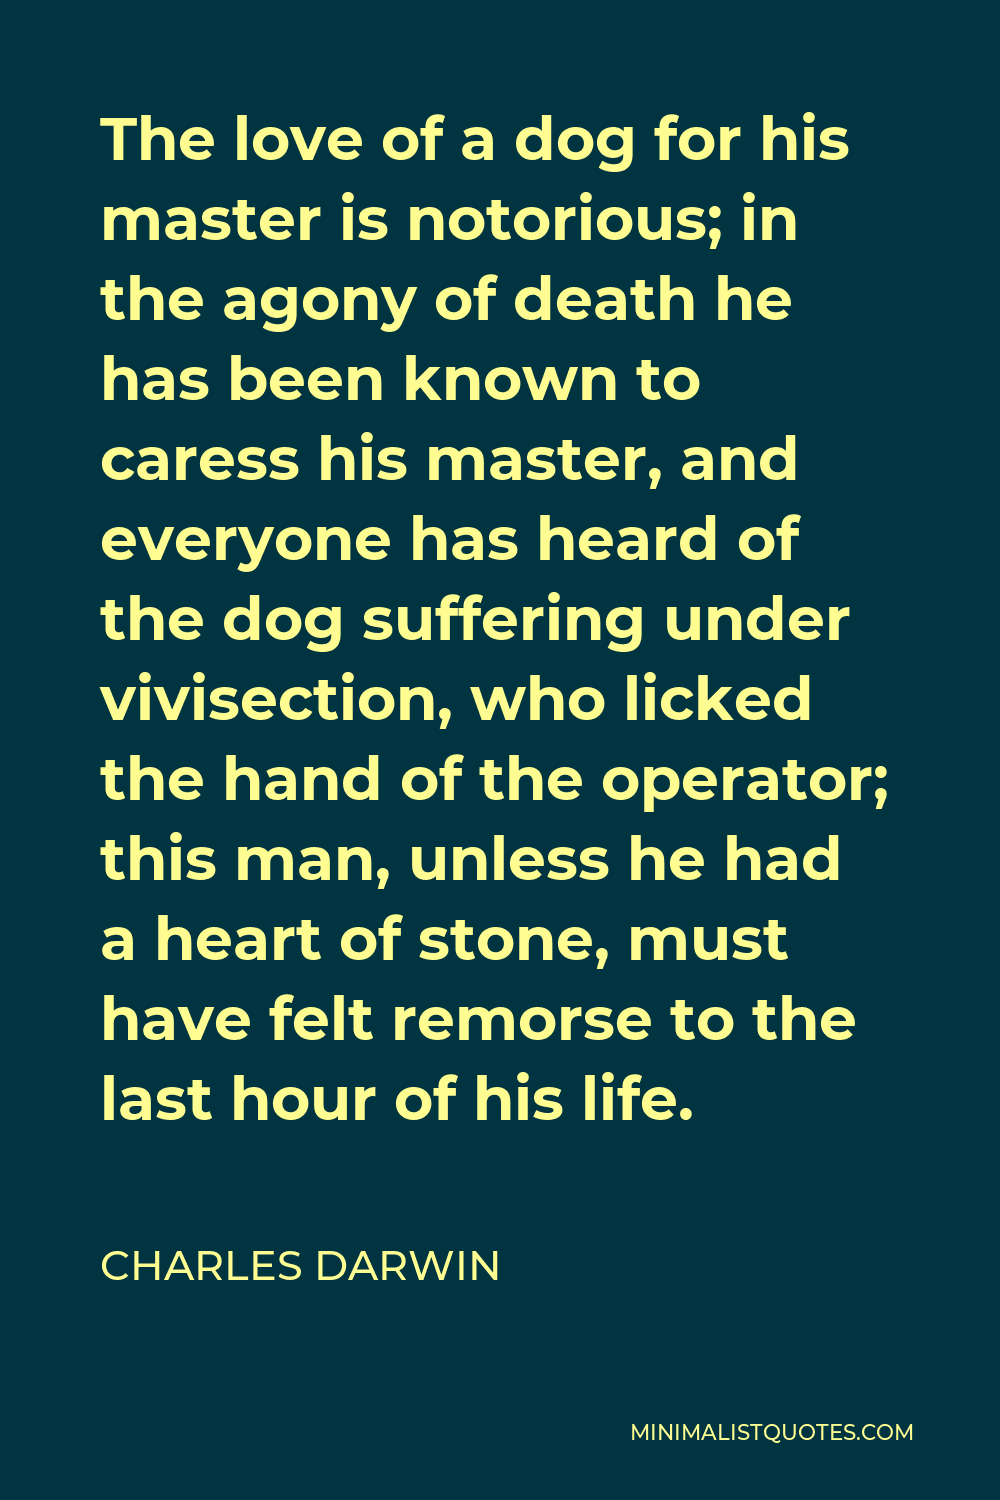 Charles Darwin Quote - The love of a dog for his master is notorious; in the agony of death he has been known to caress his master, and everyone has heard of the dog suffering under vivisection, who licked the hand of the operator; this man, unless he had a heart of stone, must have felt remorse to the last hour of his life.